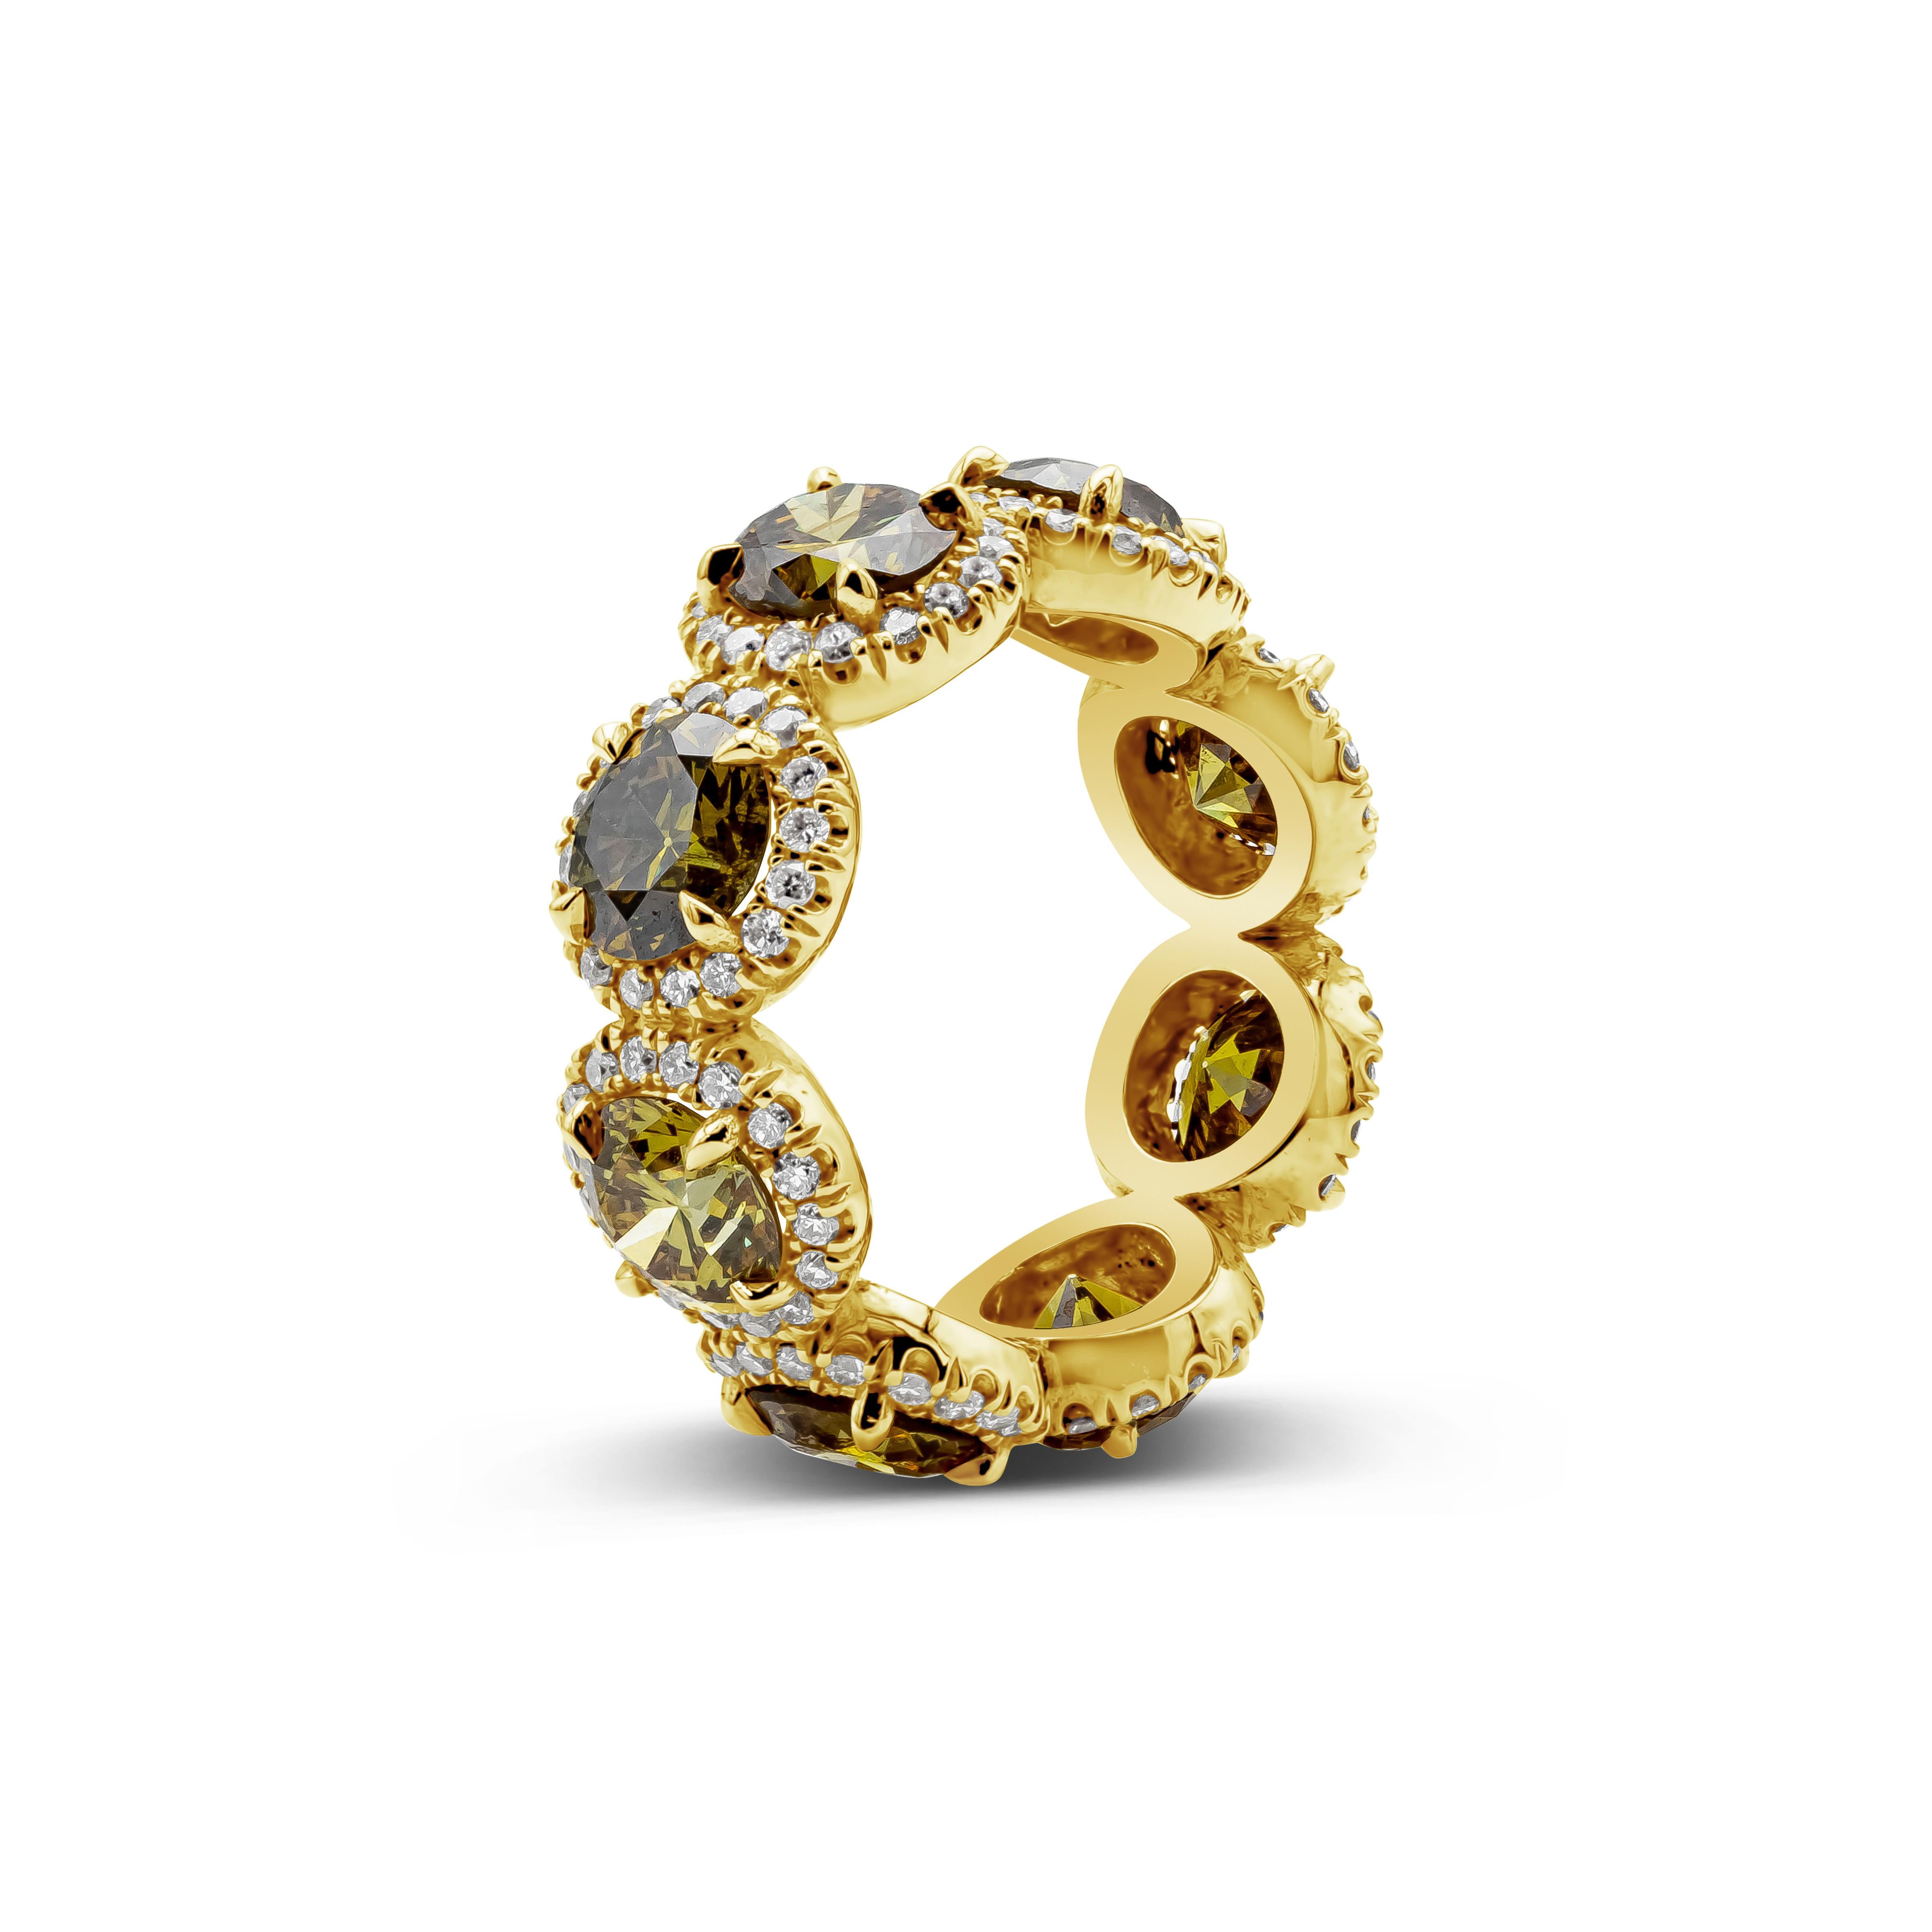 An important and color-rich piece showcasing natural round deep green and yellow diamonds weighing 5.70 carats total, each surrounded by a single row of round white diamonds. Accent diamonds weigh 0.85 carats total. Set in a polished 18K yellow gold